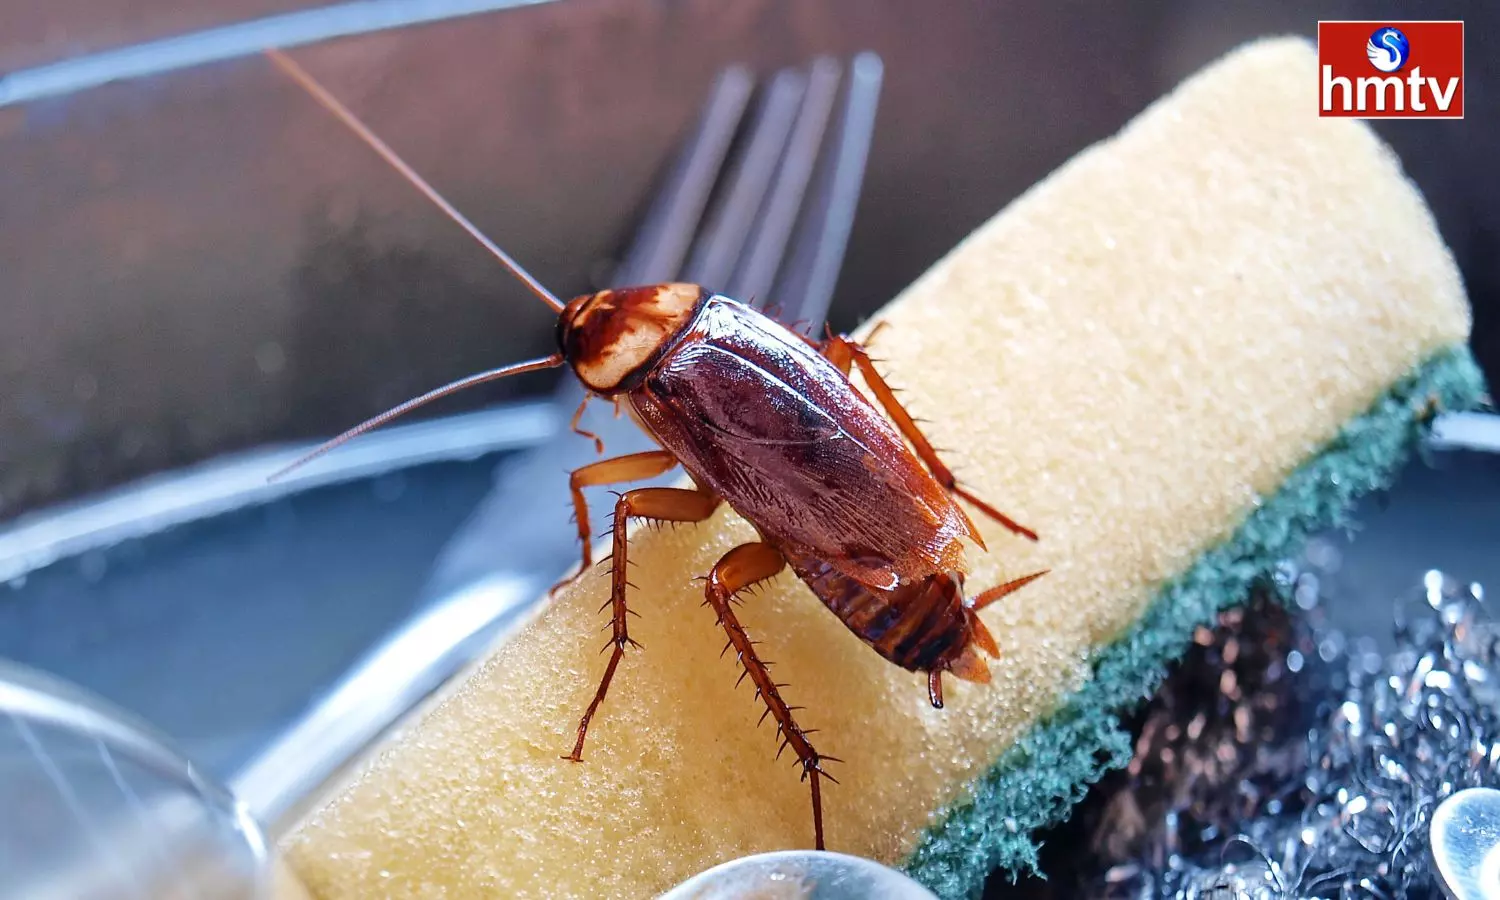 Cockroaches In The Kitchen Get Rid Of Them With These Tips